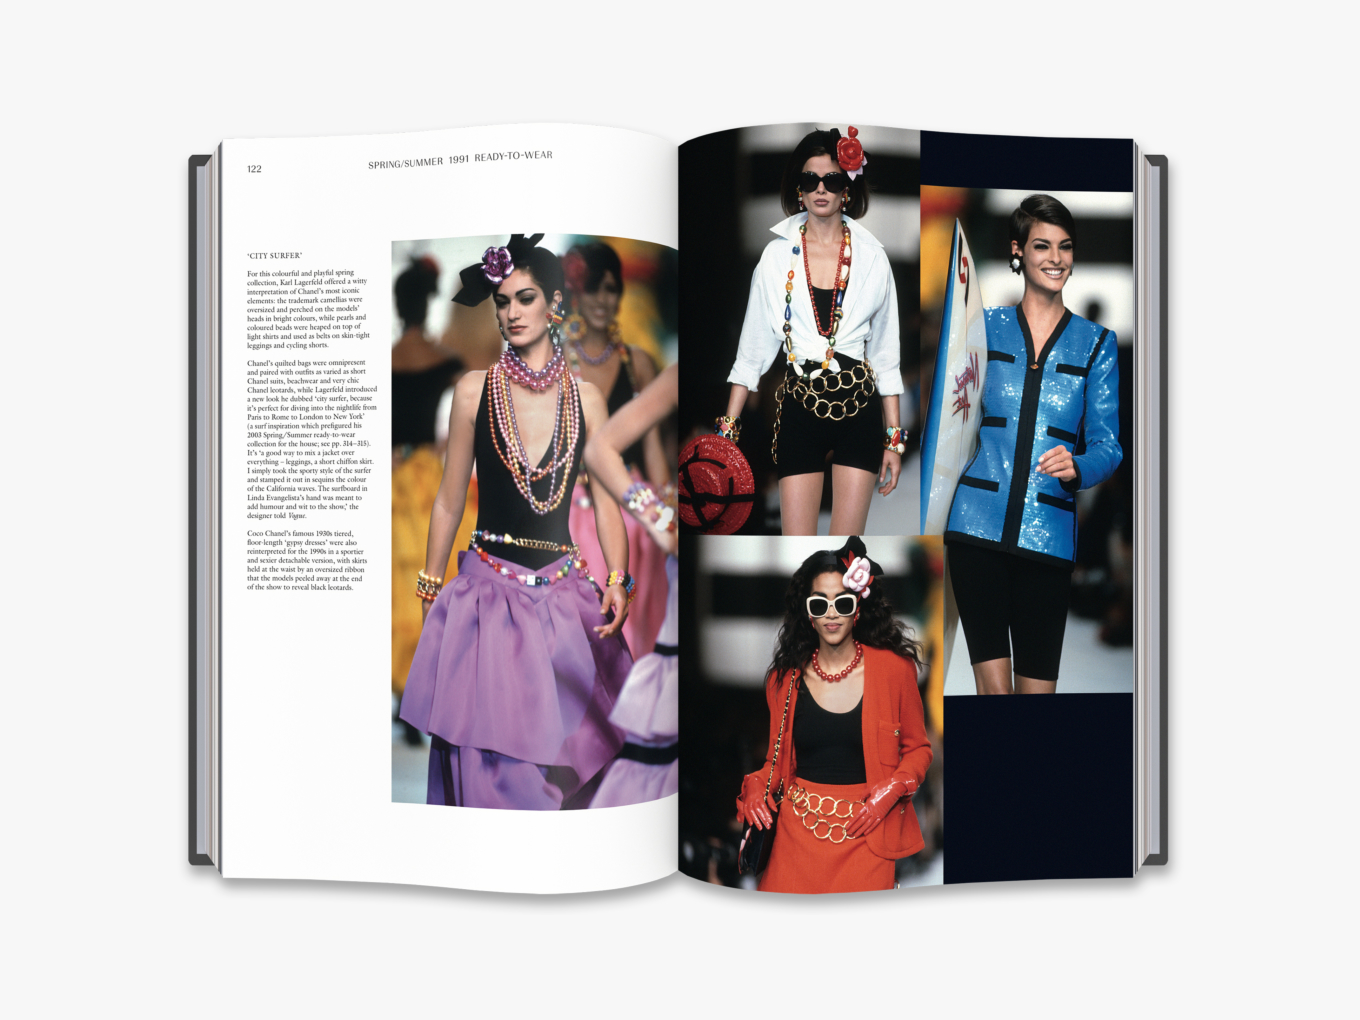 From Chanel Catwalk: The Complete Karl Lagerfeld Collections copyright Thames & Hudson 2016